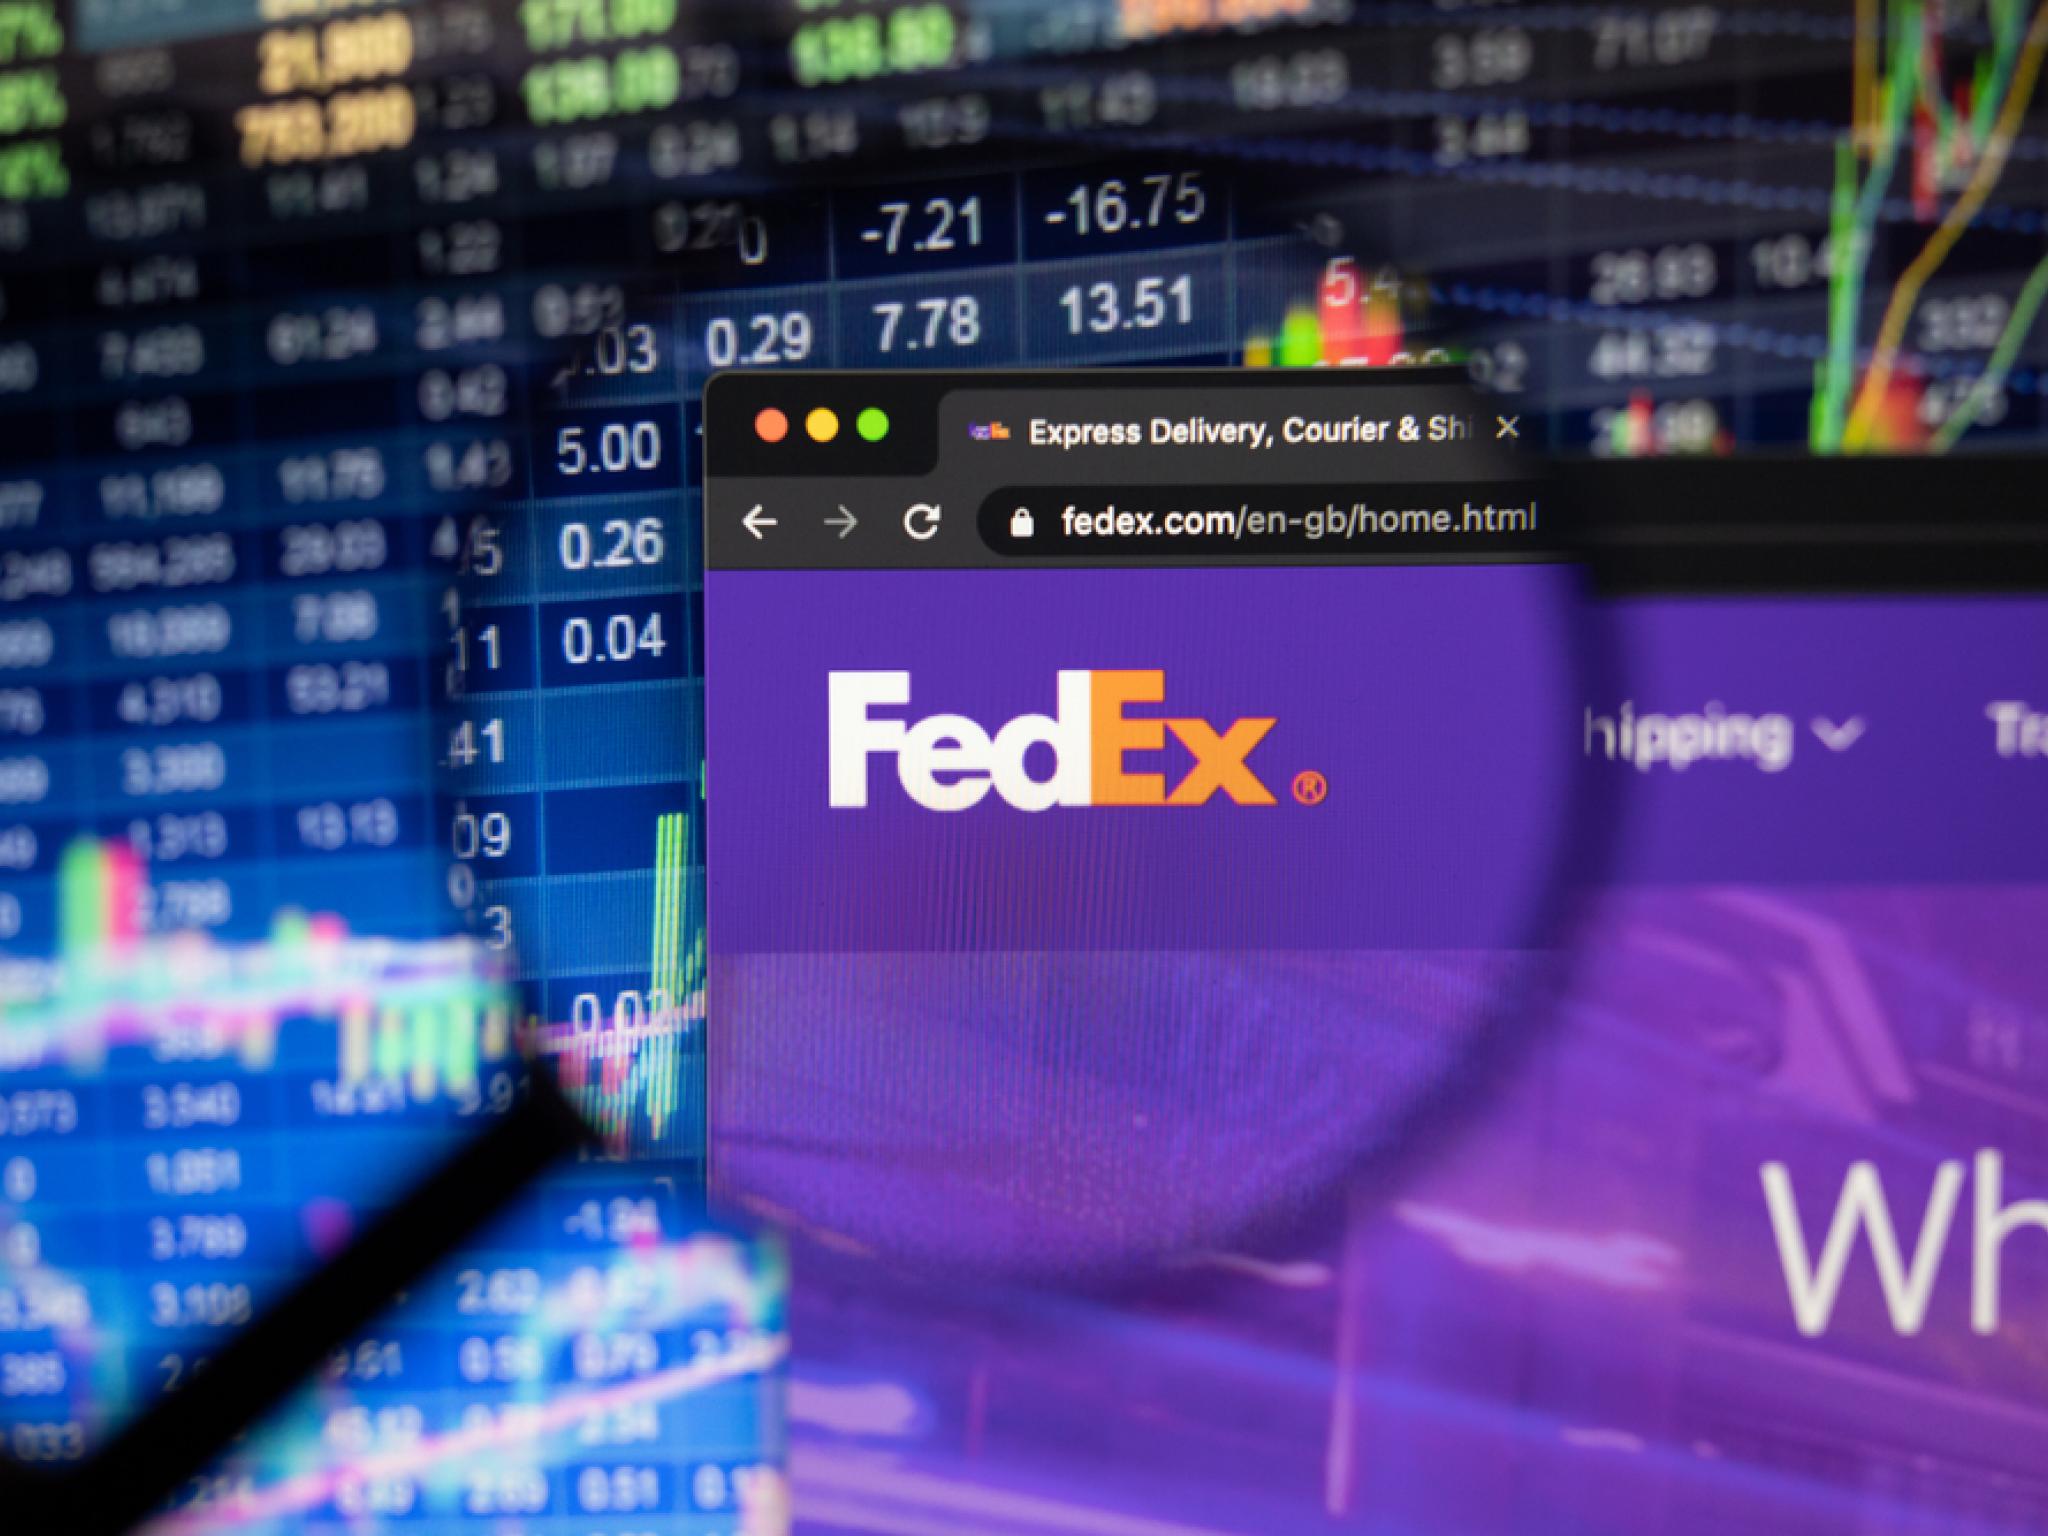  fedex-q4-results-solid-2025-guidance-appropriate-freight-spinoff-tantalizing-opportunity-for-investors-7-analysts-size-up-results-whats-next 